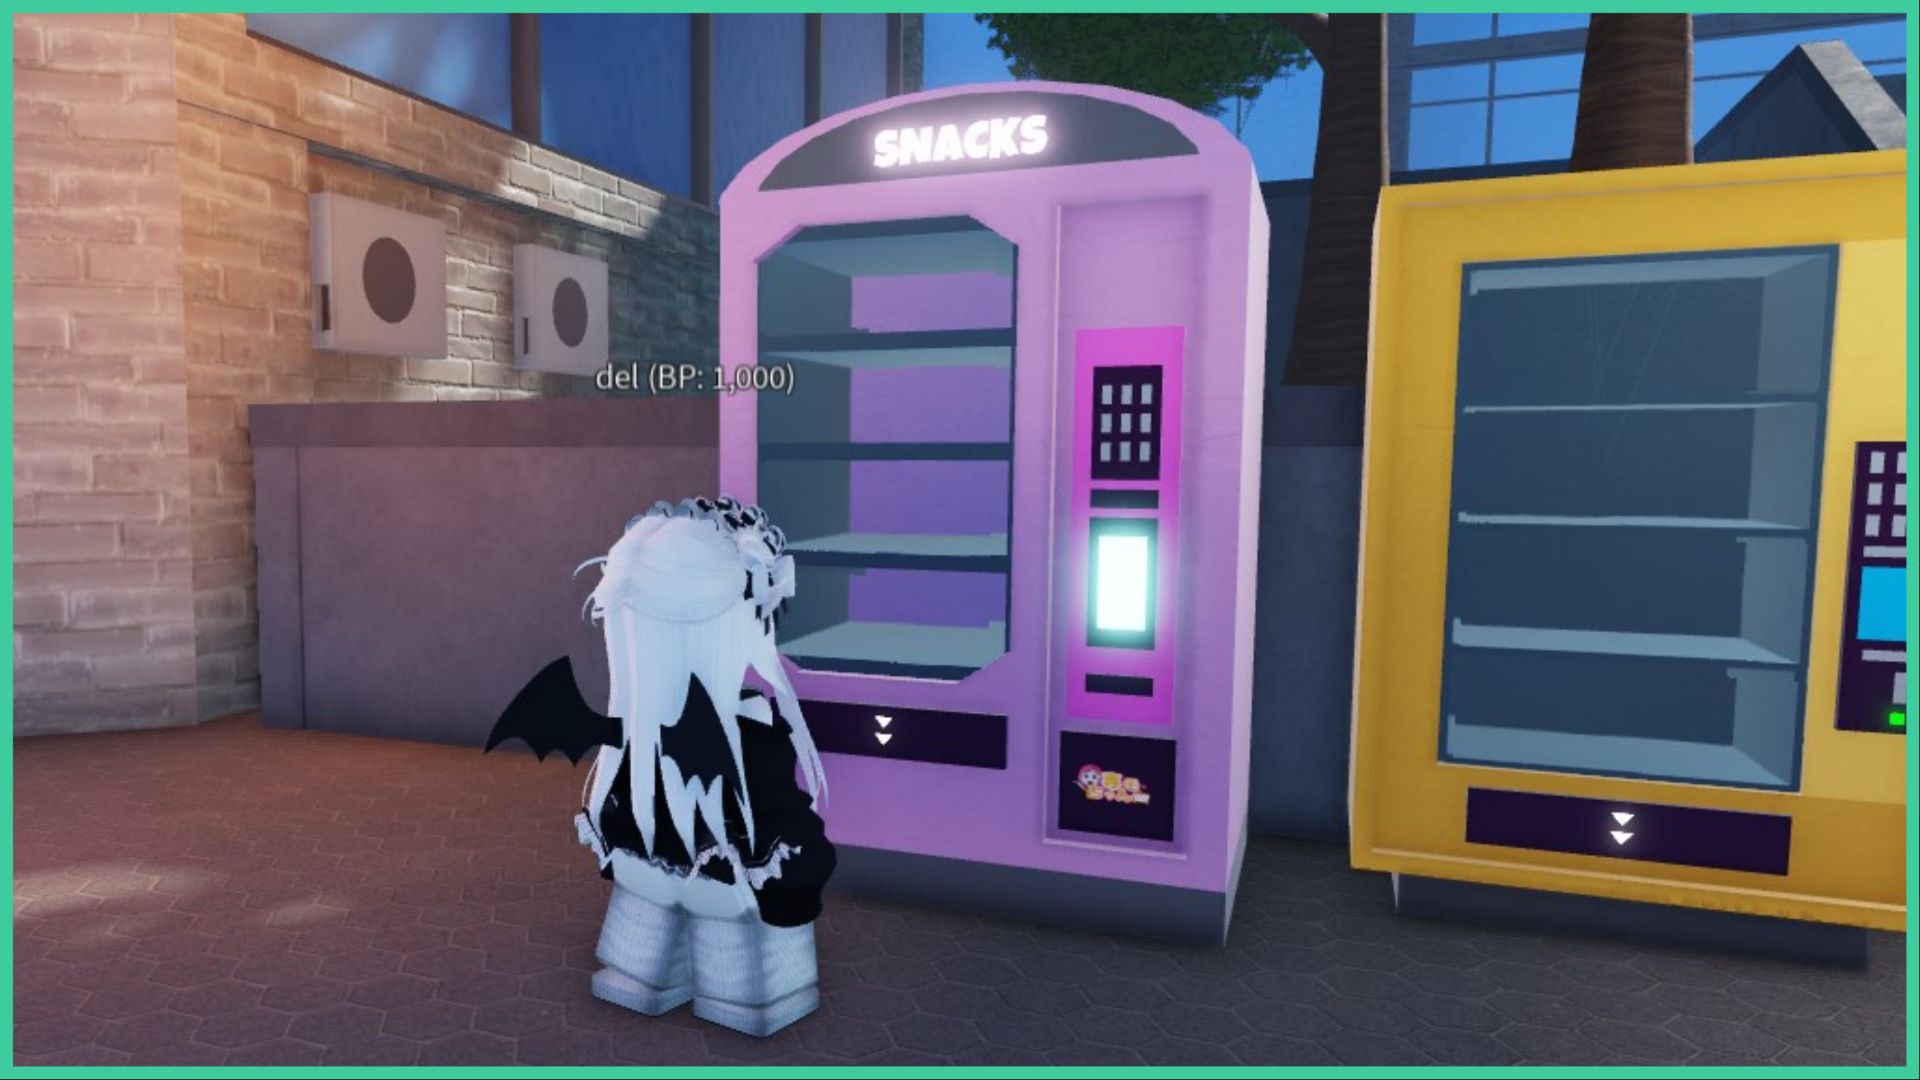 feature image for our bladers rebirth spirit tier list, it's a screenshot of a roblox player standing in front of a pastel pink vending machine that has a lit up sign that reads snacks, yet the machine is empty, there is an empty yellow vending machine to the right of it